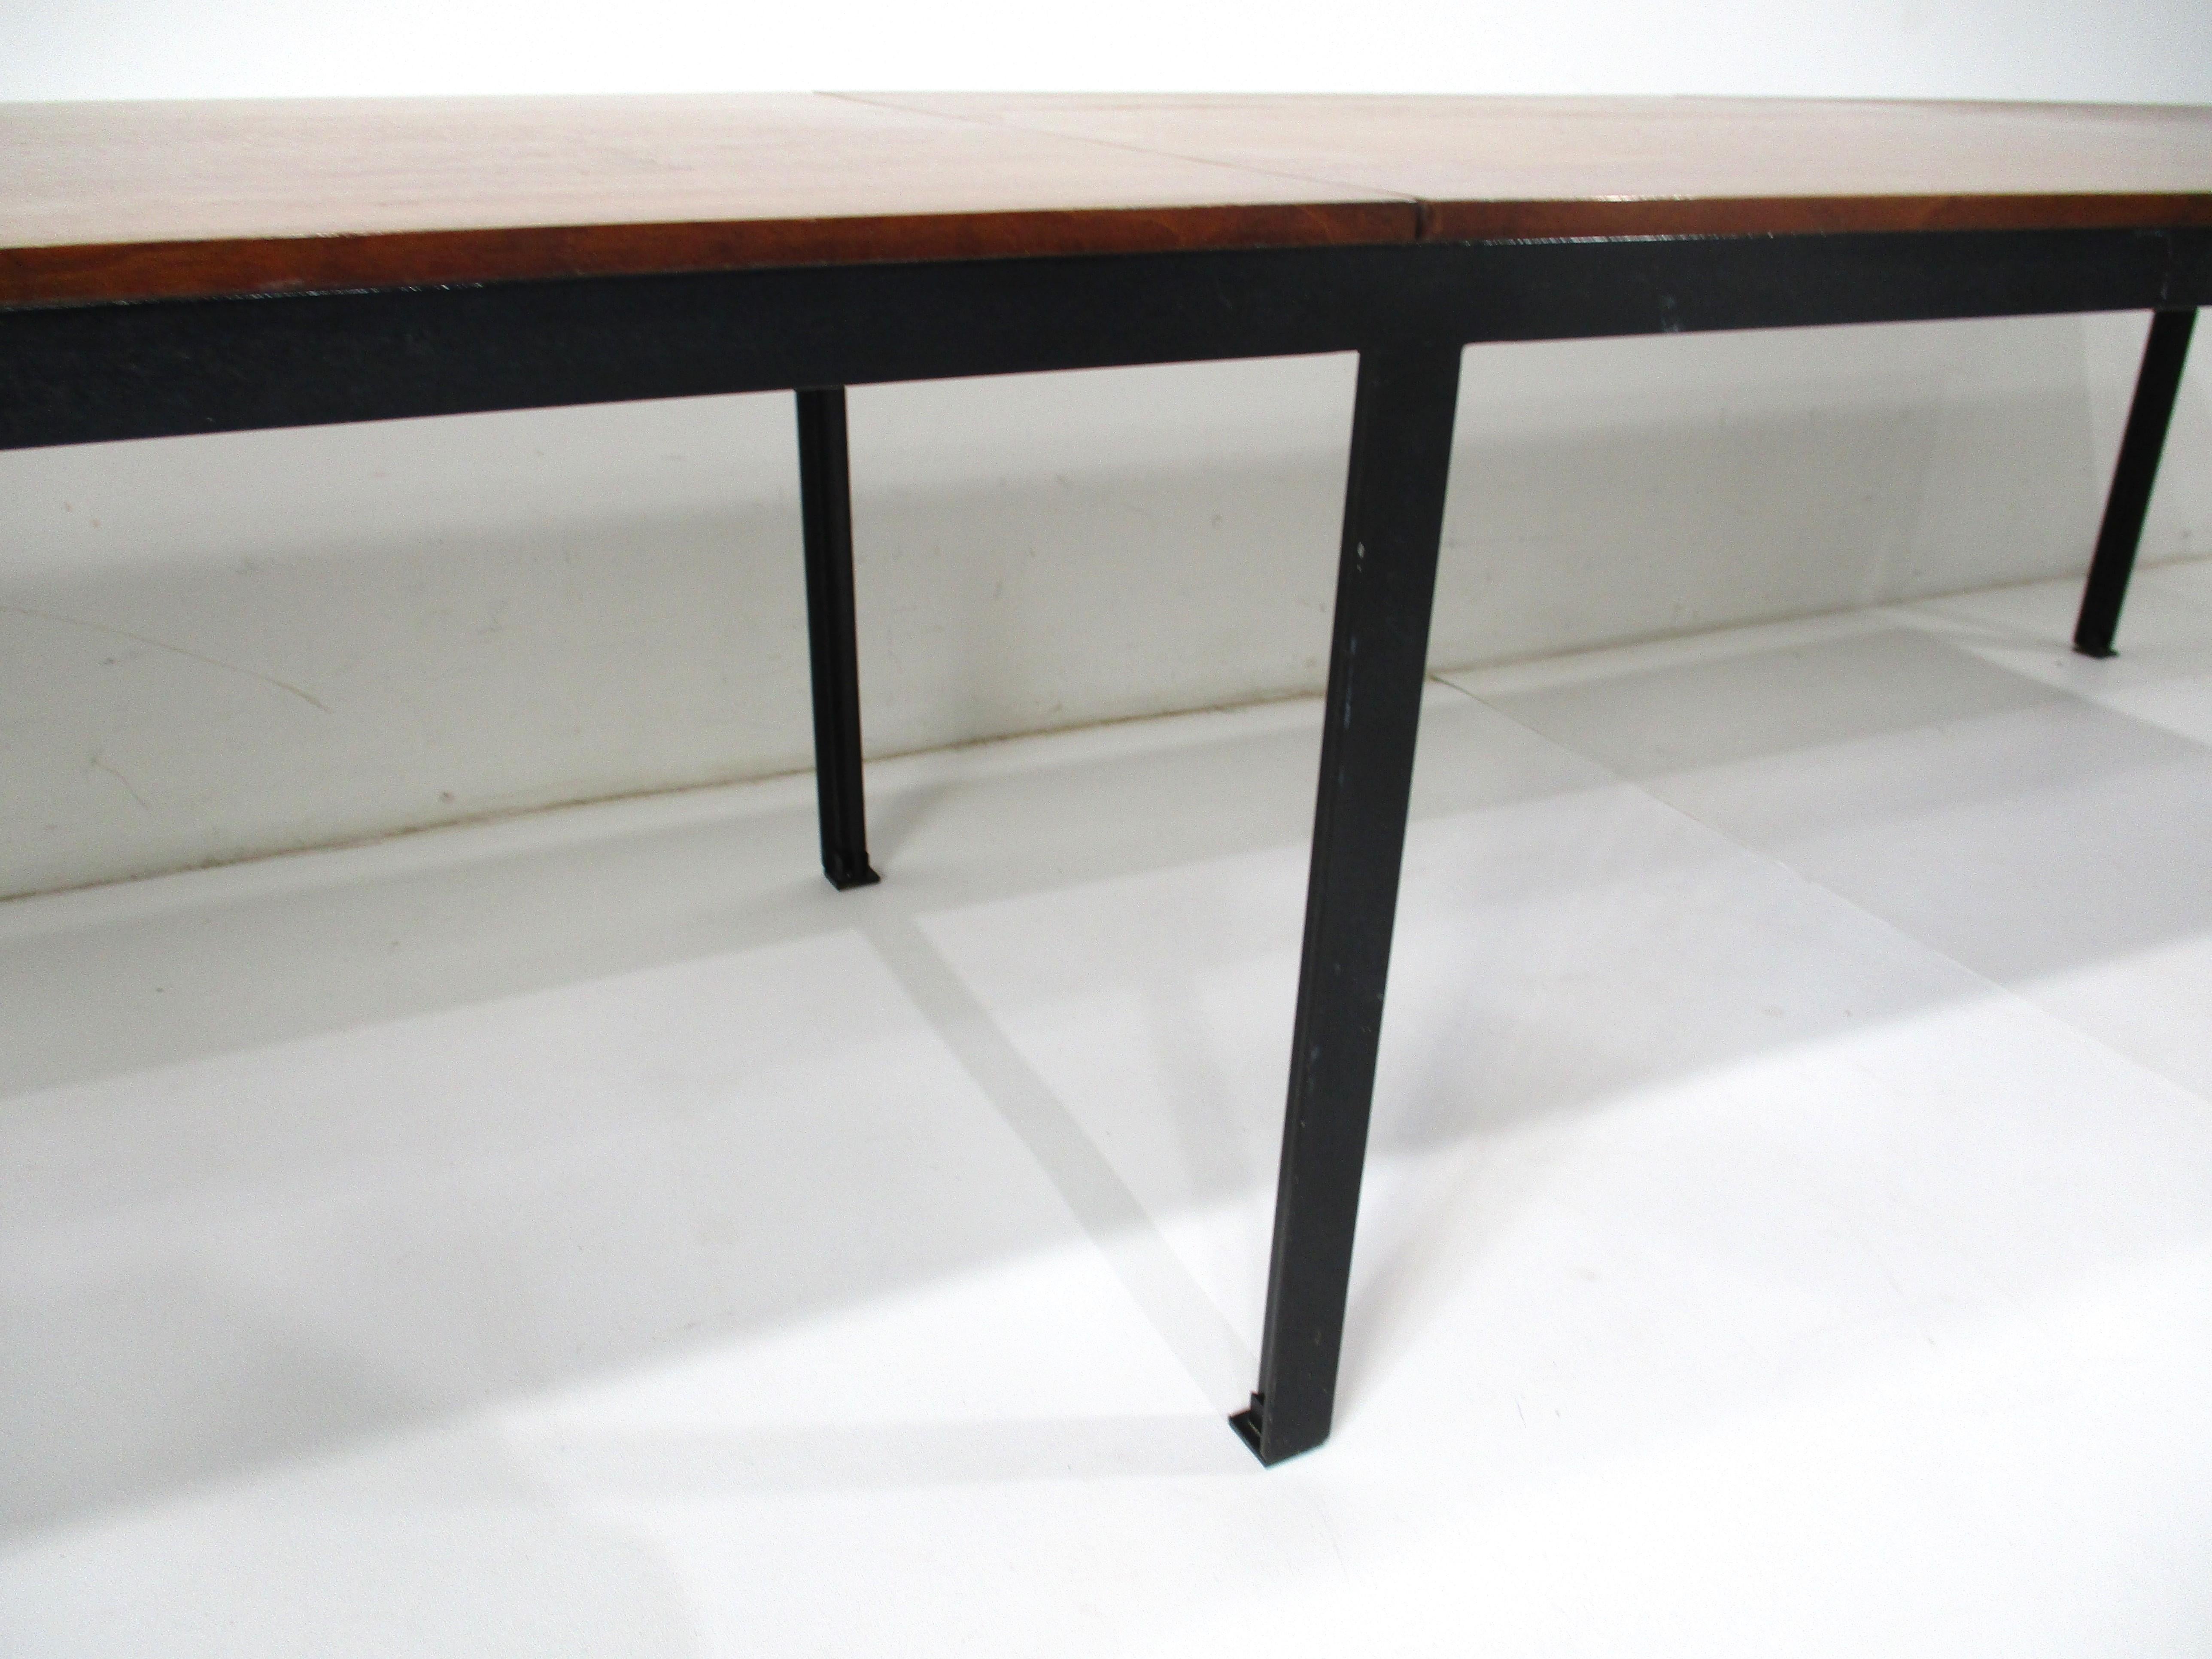 Early T Angle Walnut Coffee Table / Bench by Florence Knoll # 332 for Knoll (A)  For Sale 2